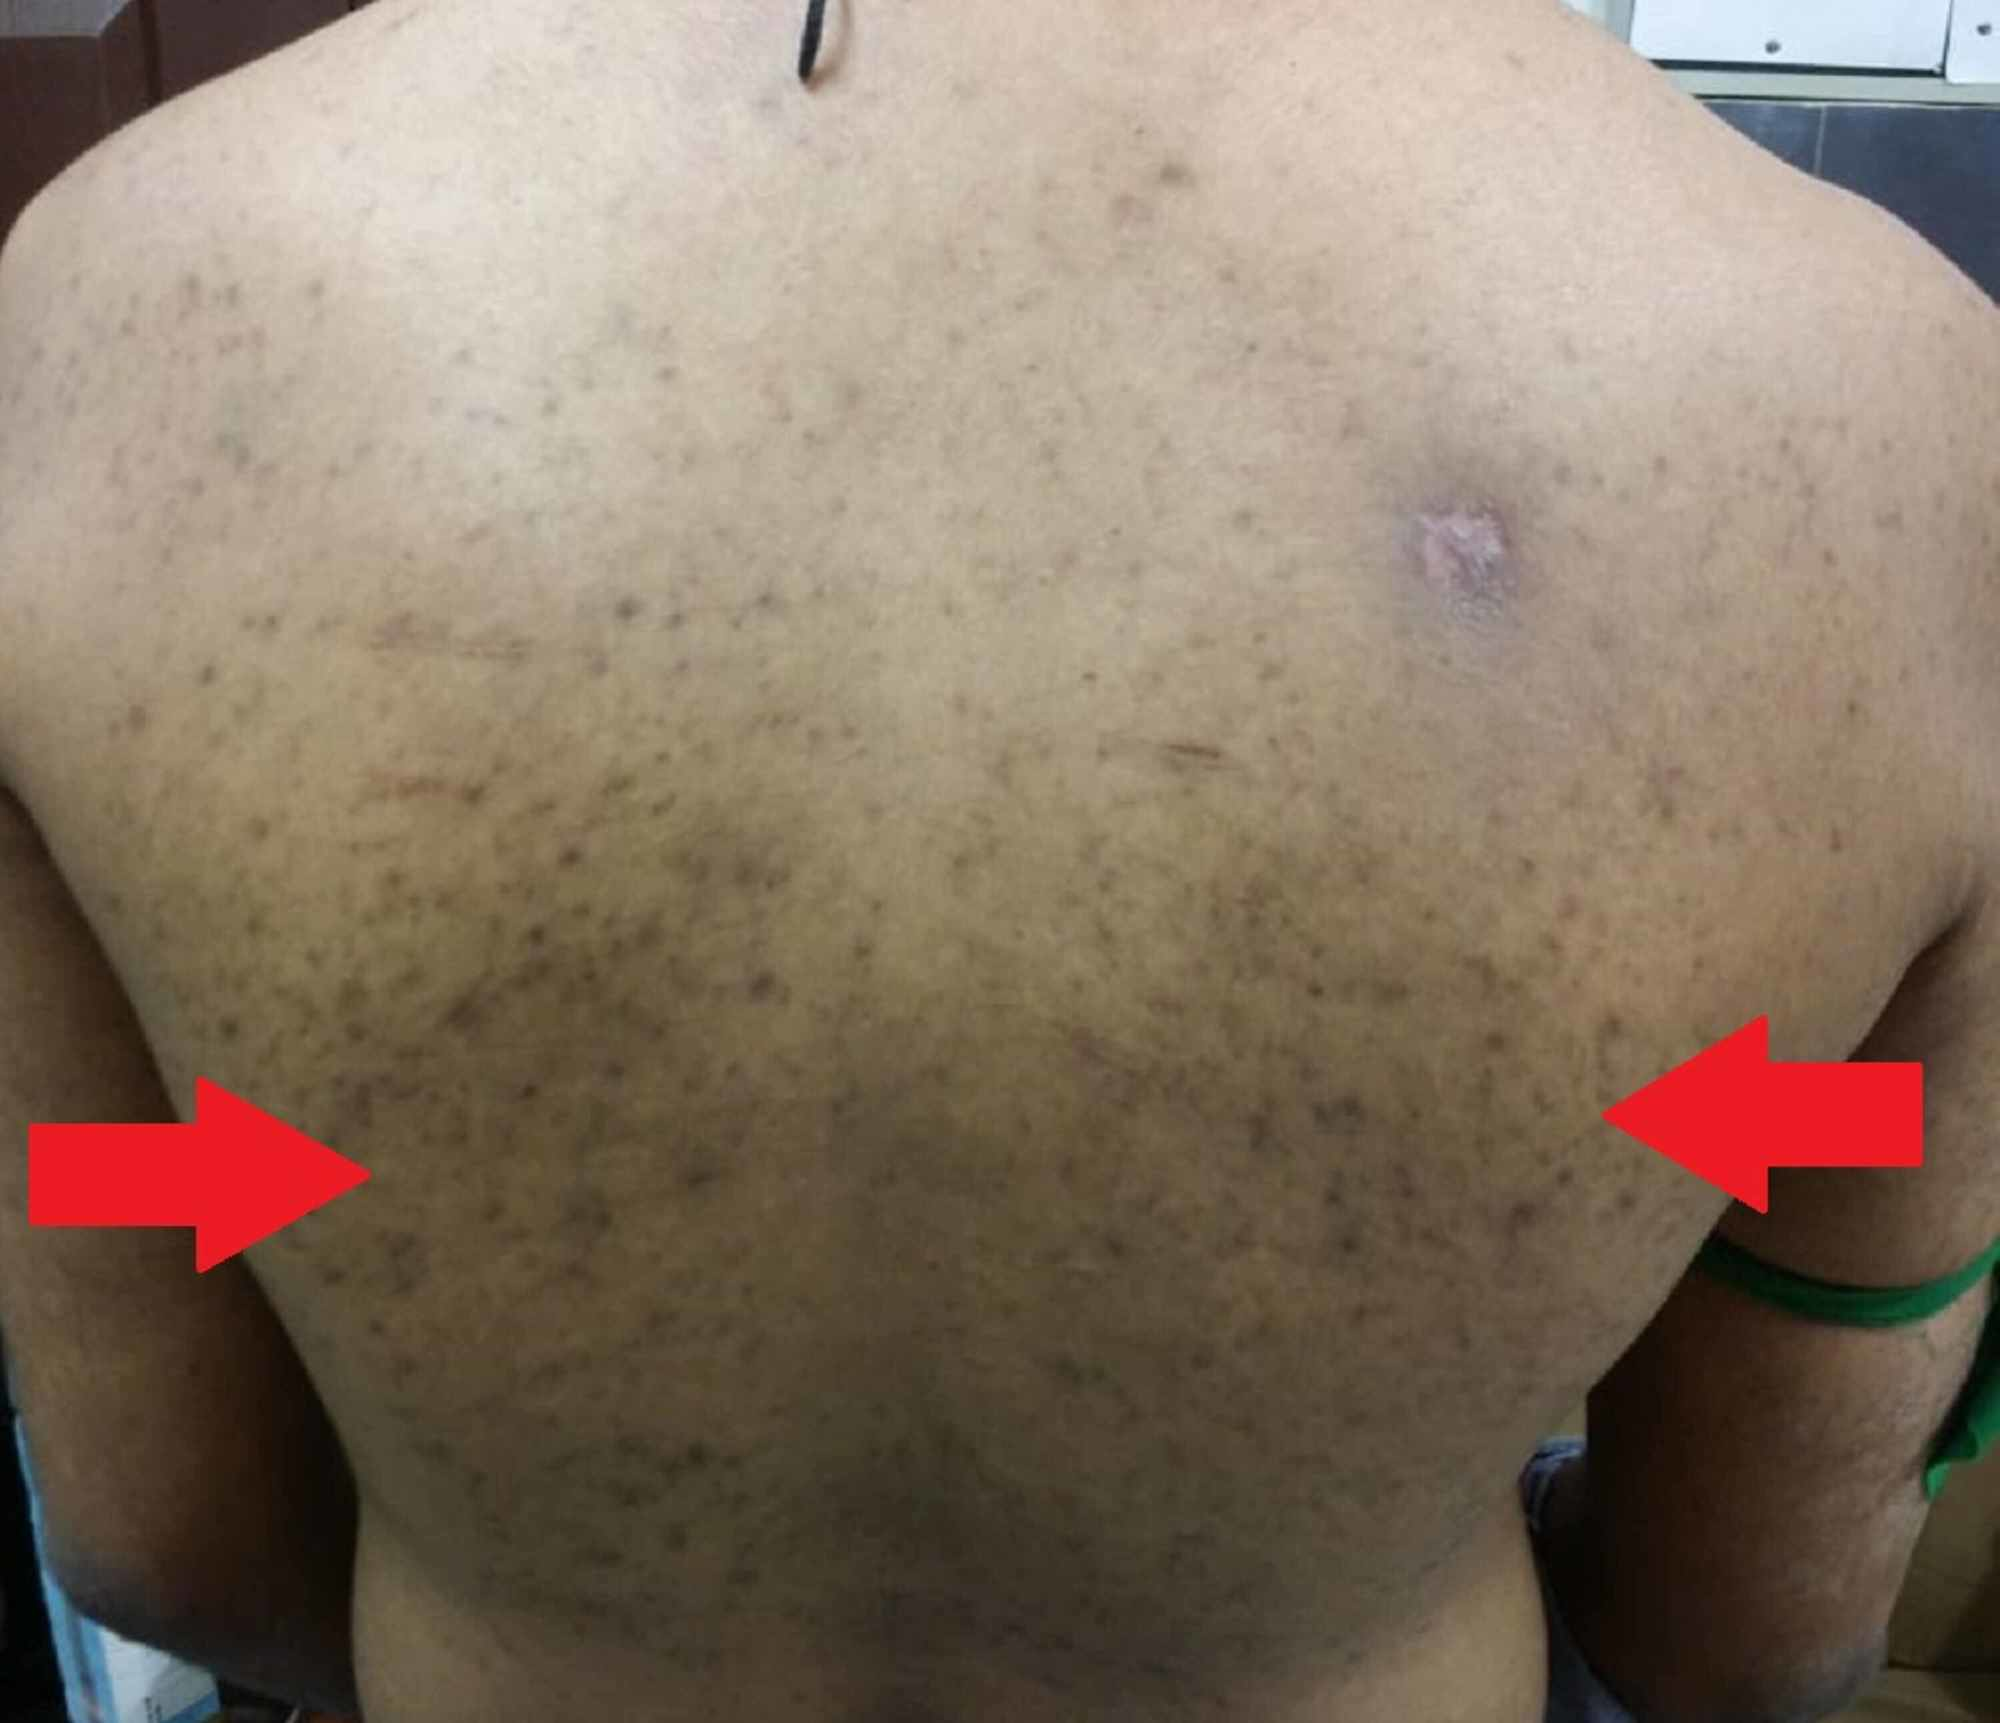 Cureus | Young-onset Amyotrophic Lateral Sclerosis with Rare Skin Manifestation: Case Report and Literature